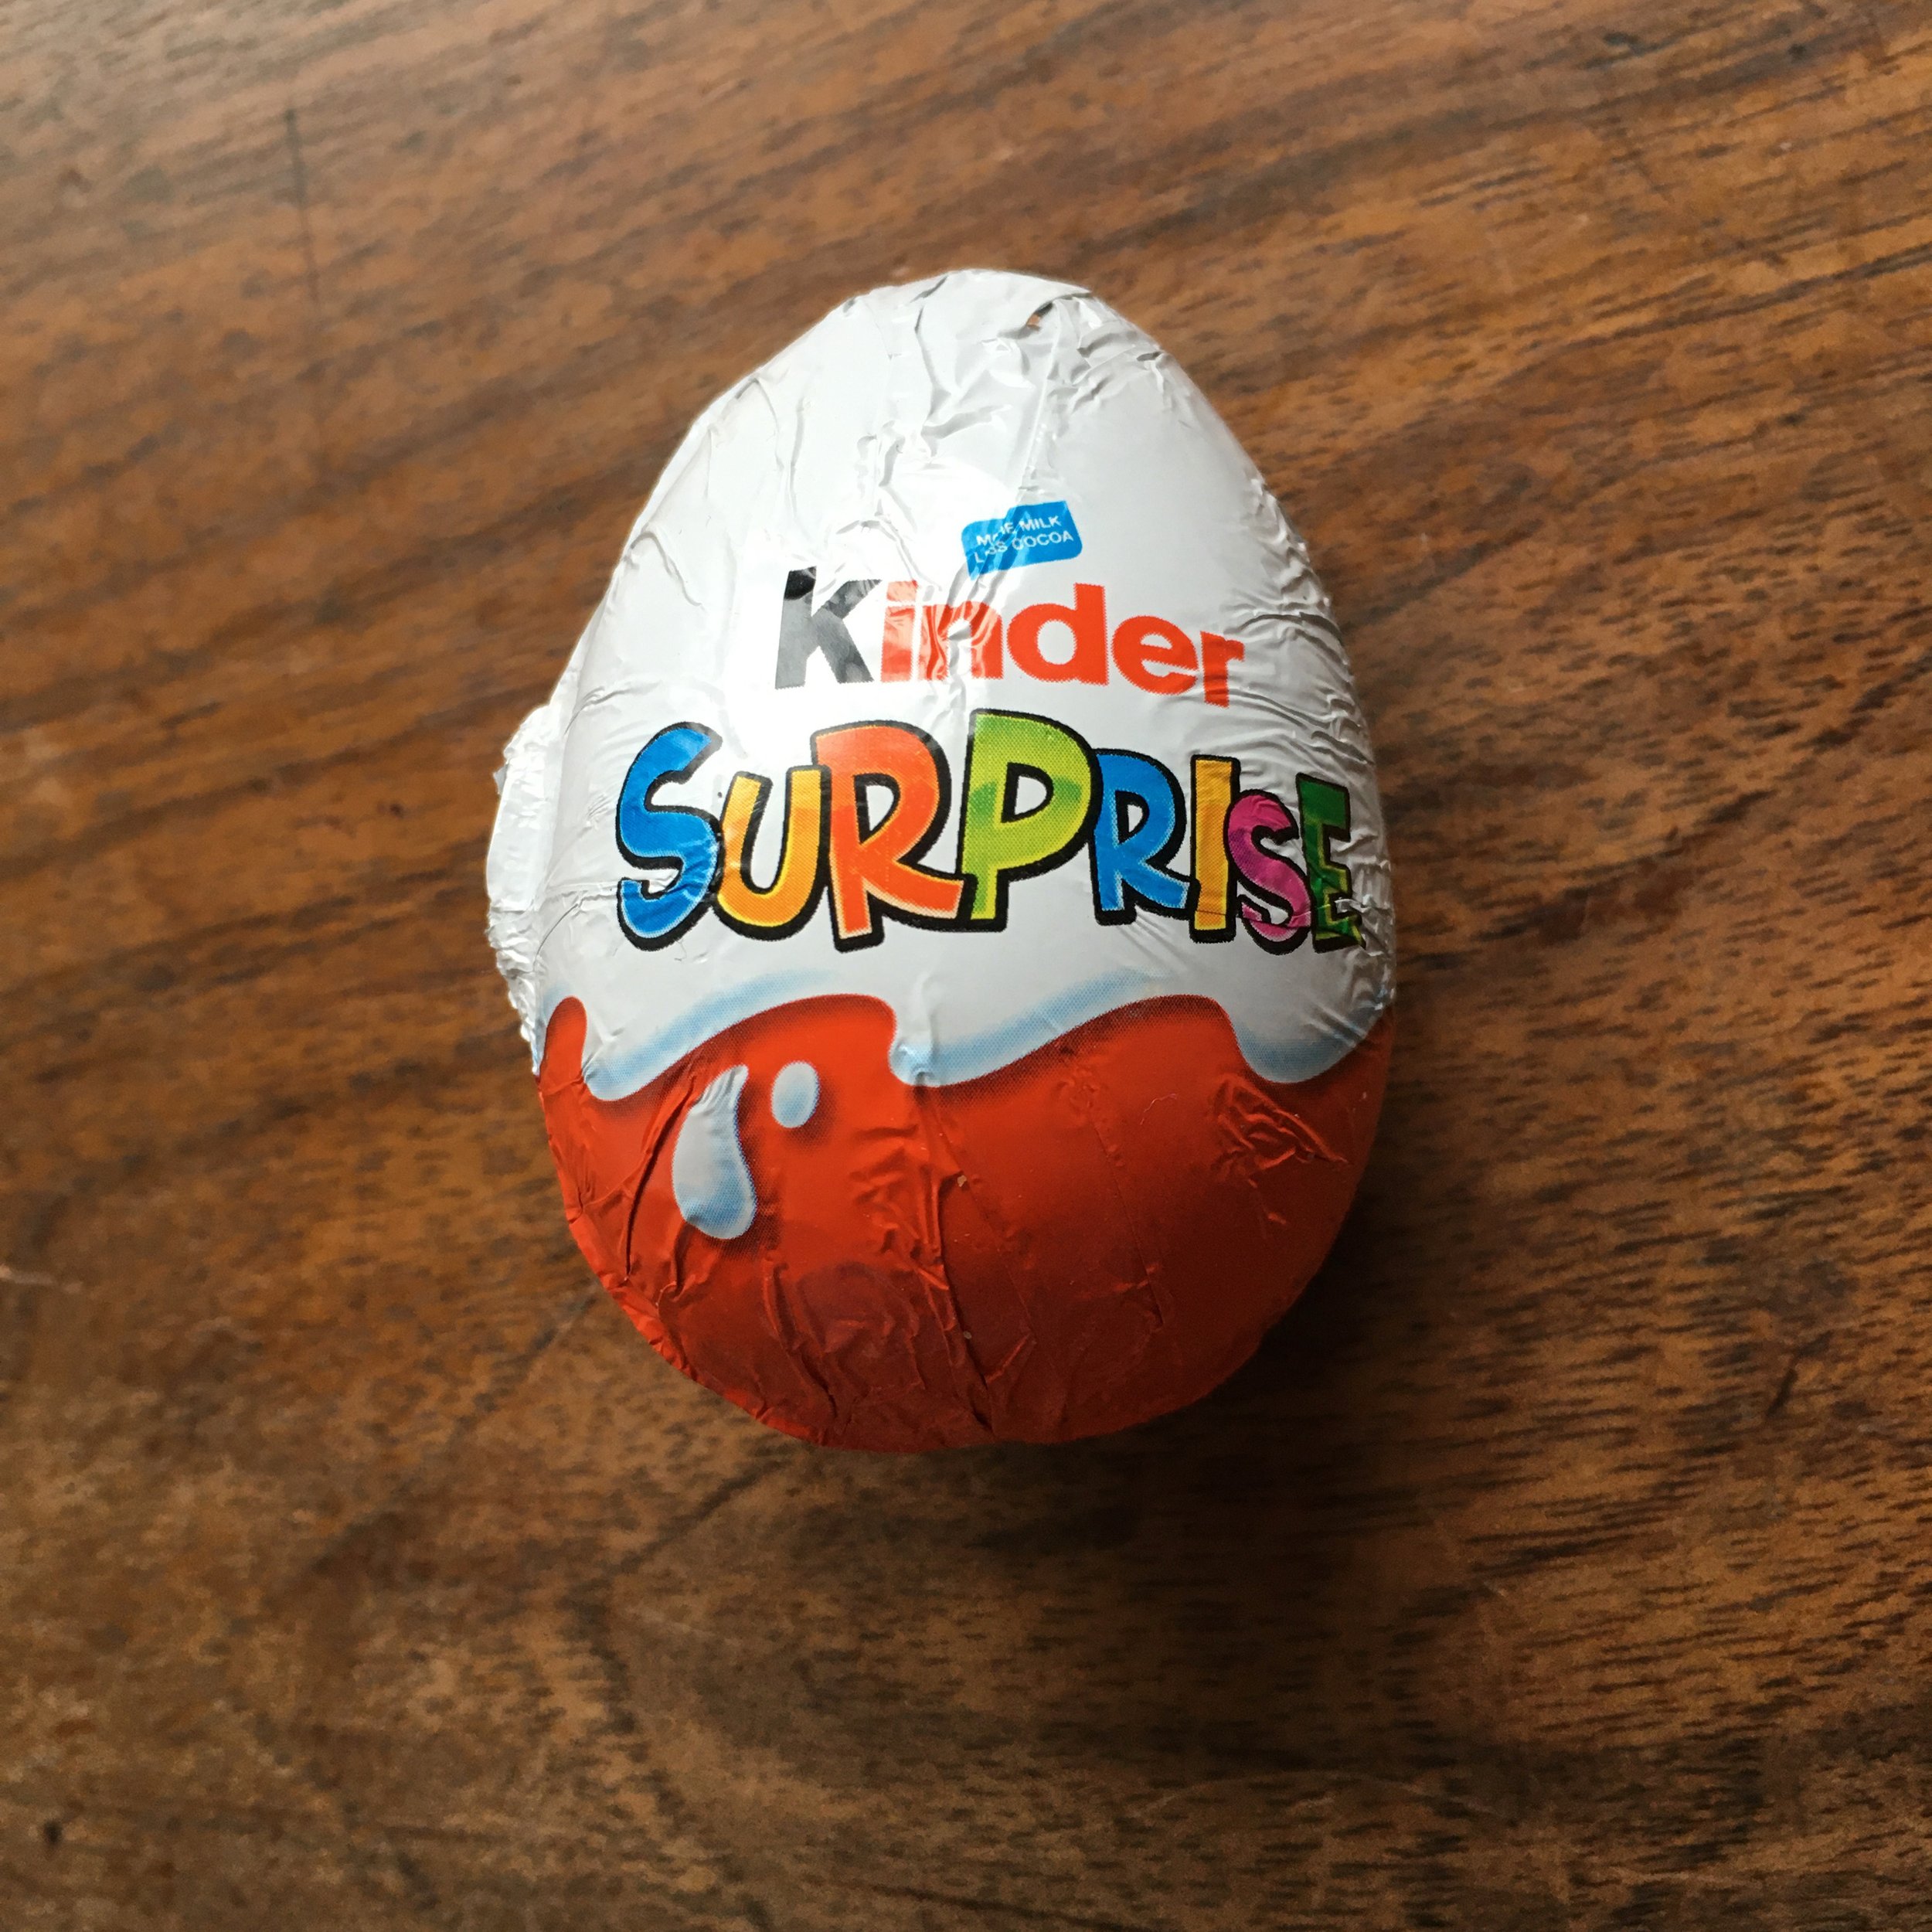  a Kinder Surprise egg: a larger-than-a-hen’s-egg chocolate egg wrapped in orange and white foil 